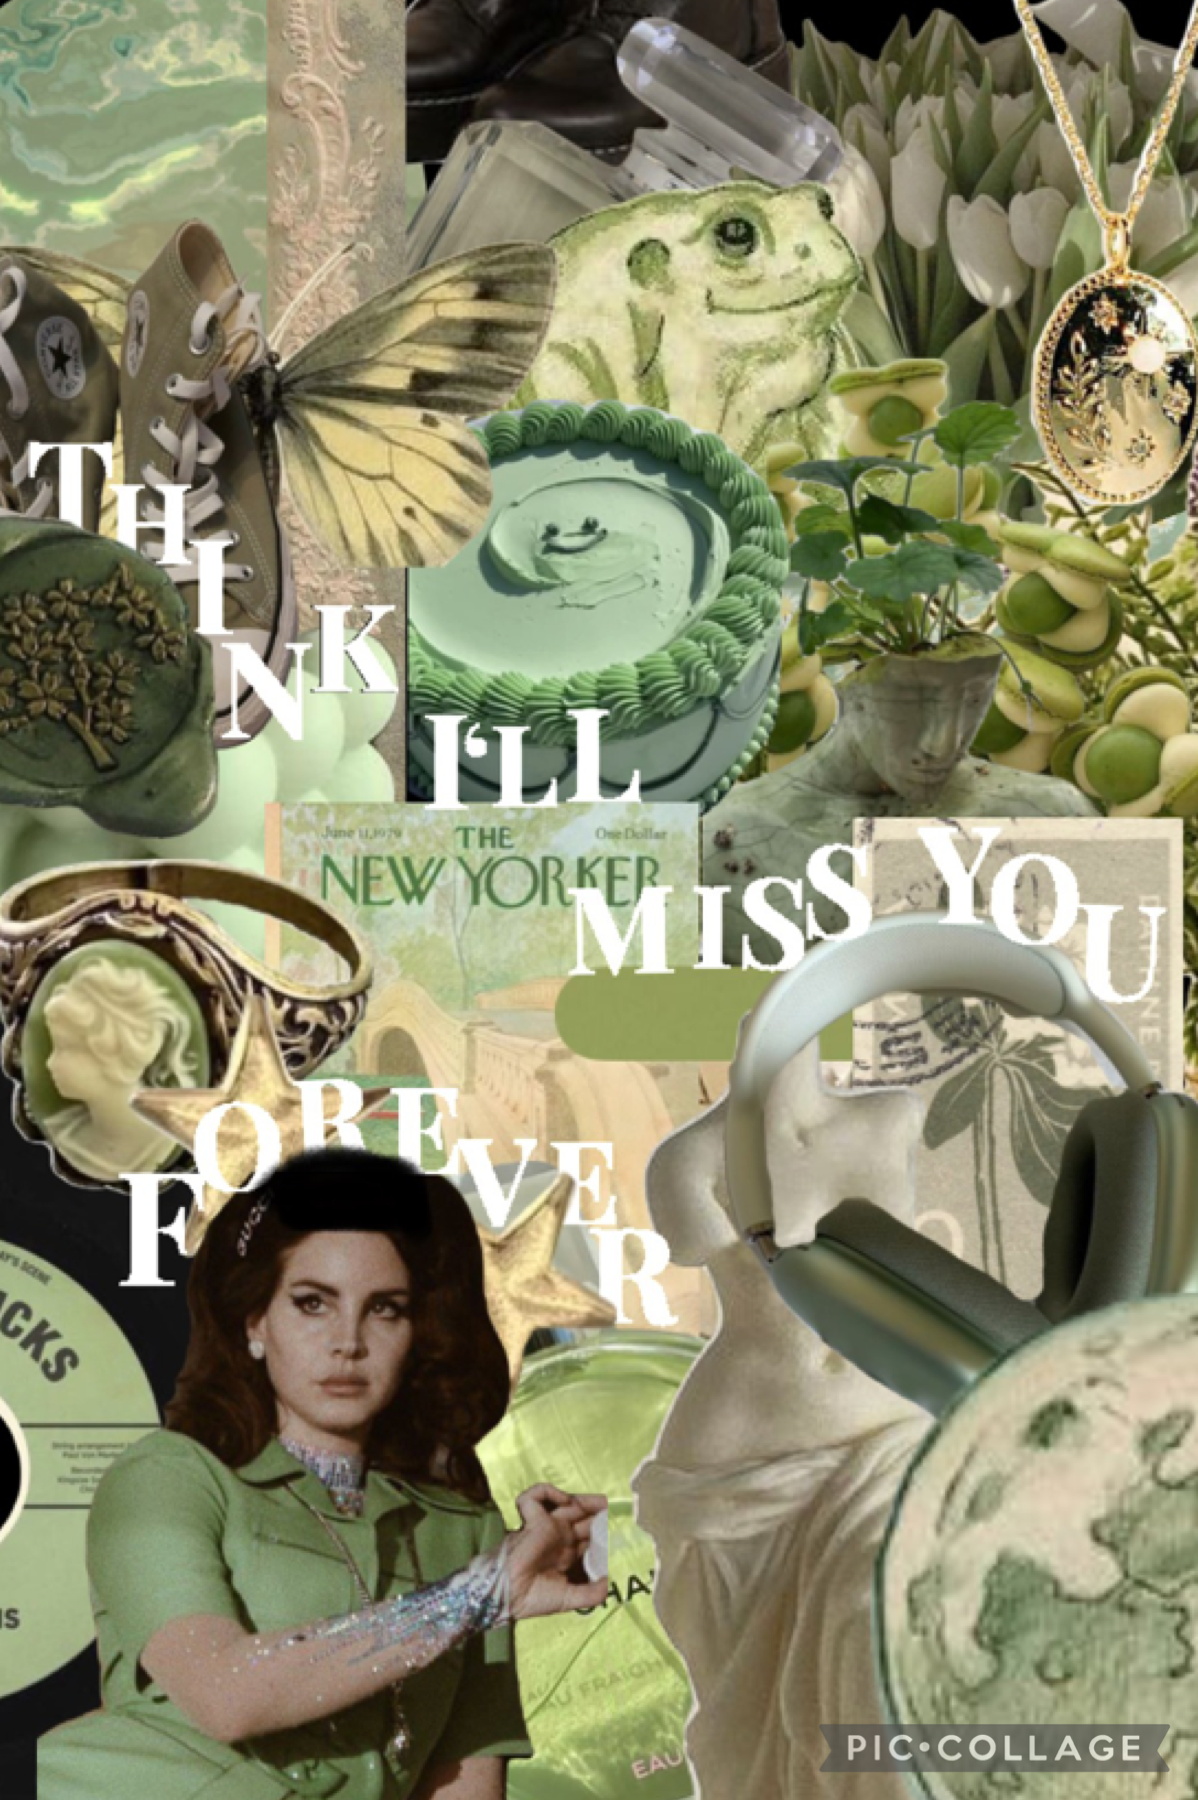 🌱🥒 t a p 🥒🌱

Summertime Sadness - Lana Del Rey

thanks again for the requests @talented_passively i’ve been having a very productive day collage-wise haha :)